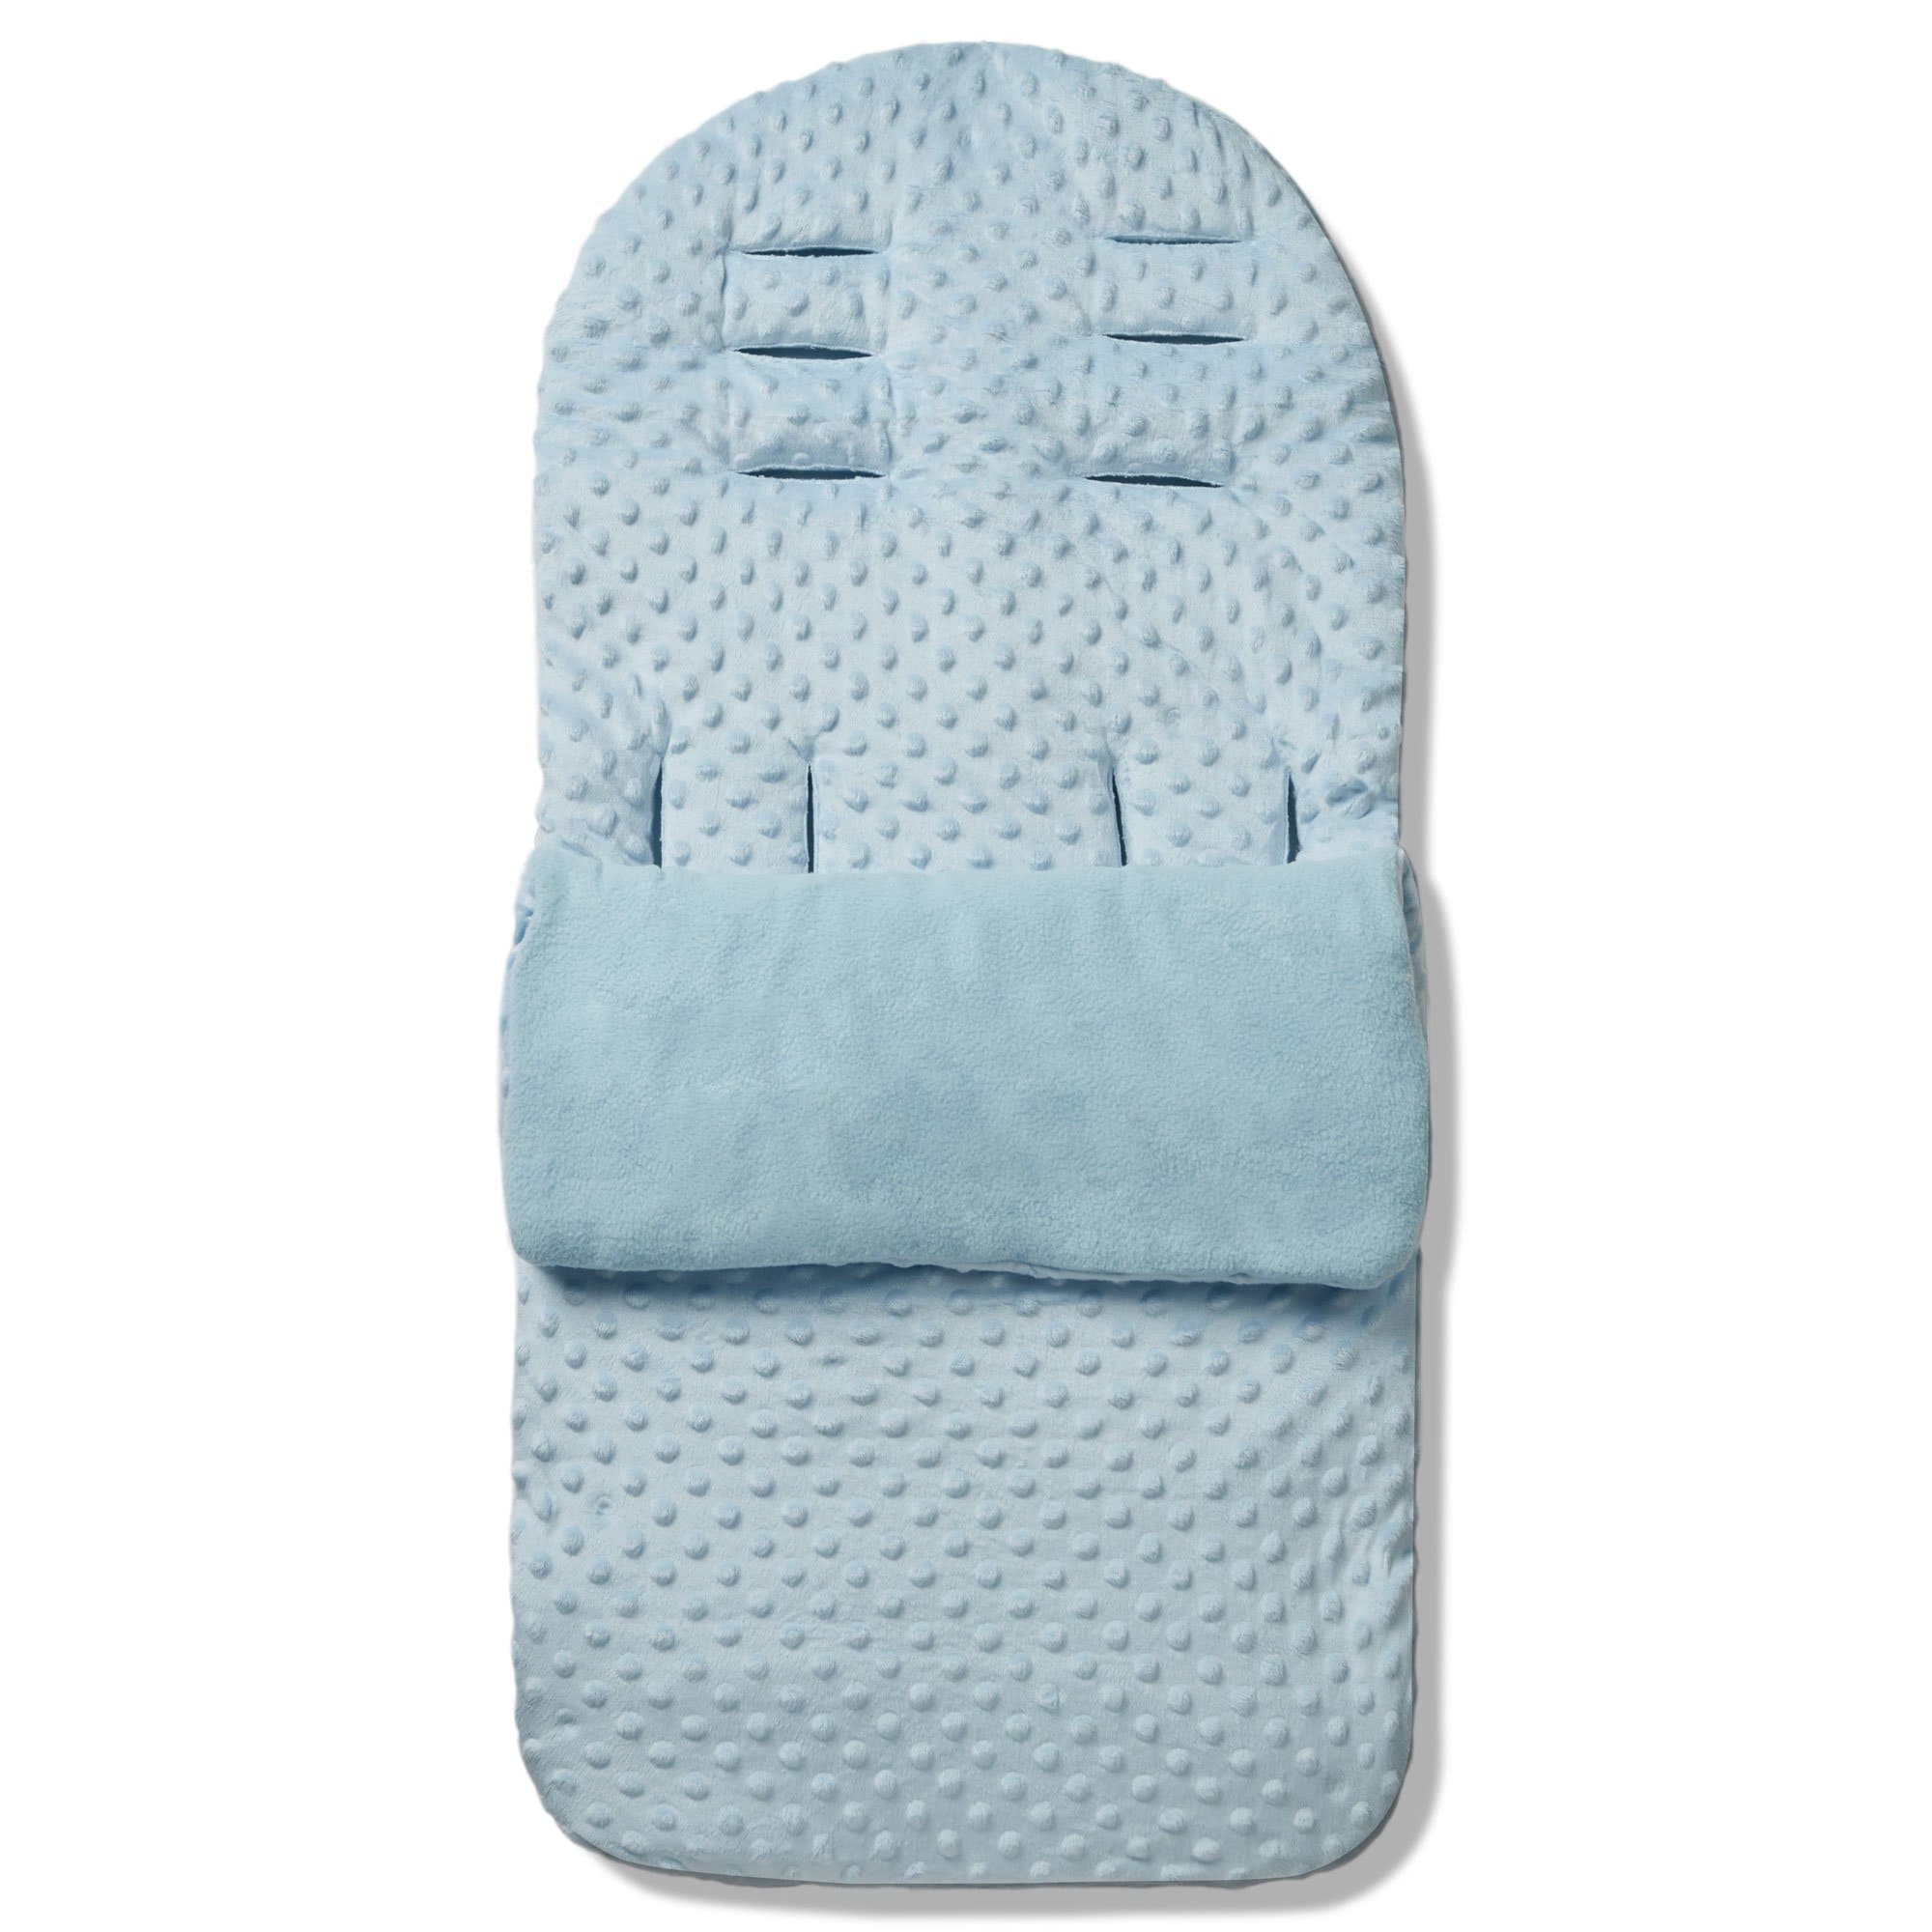 Dimple Footmuff / Cosy Toes Compatible with Maxi Cosi - Blue / Fits All Models | For Your Little One